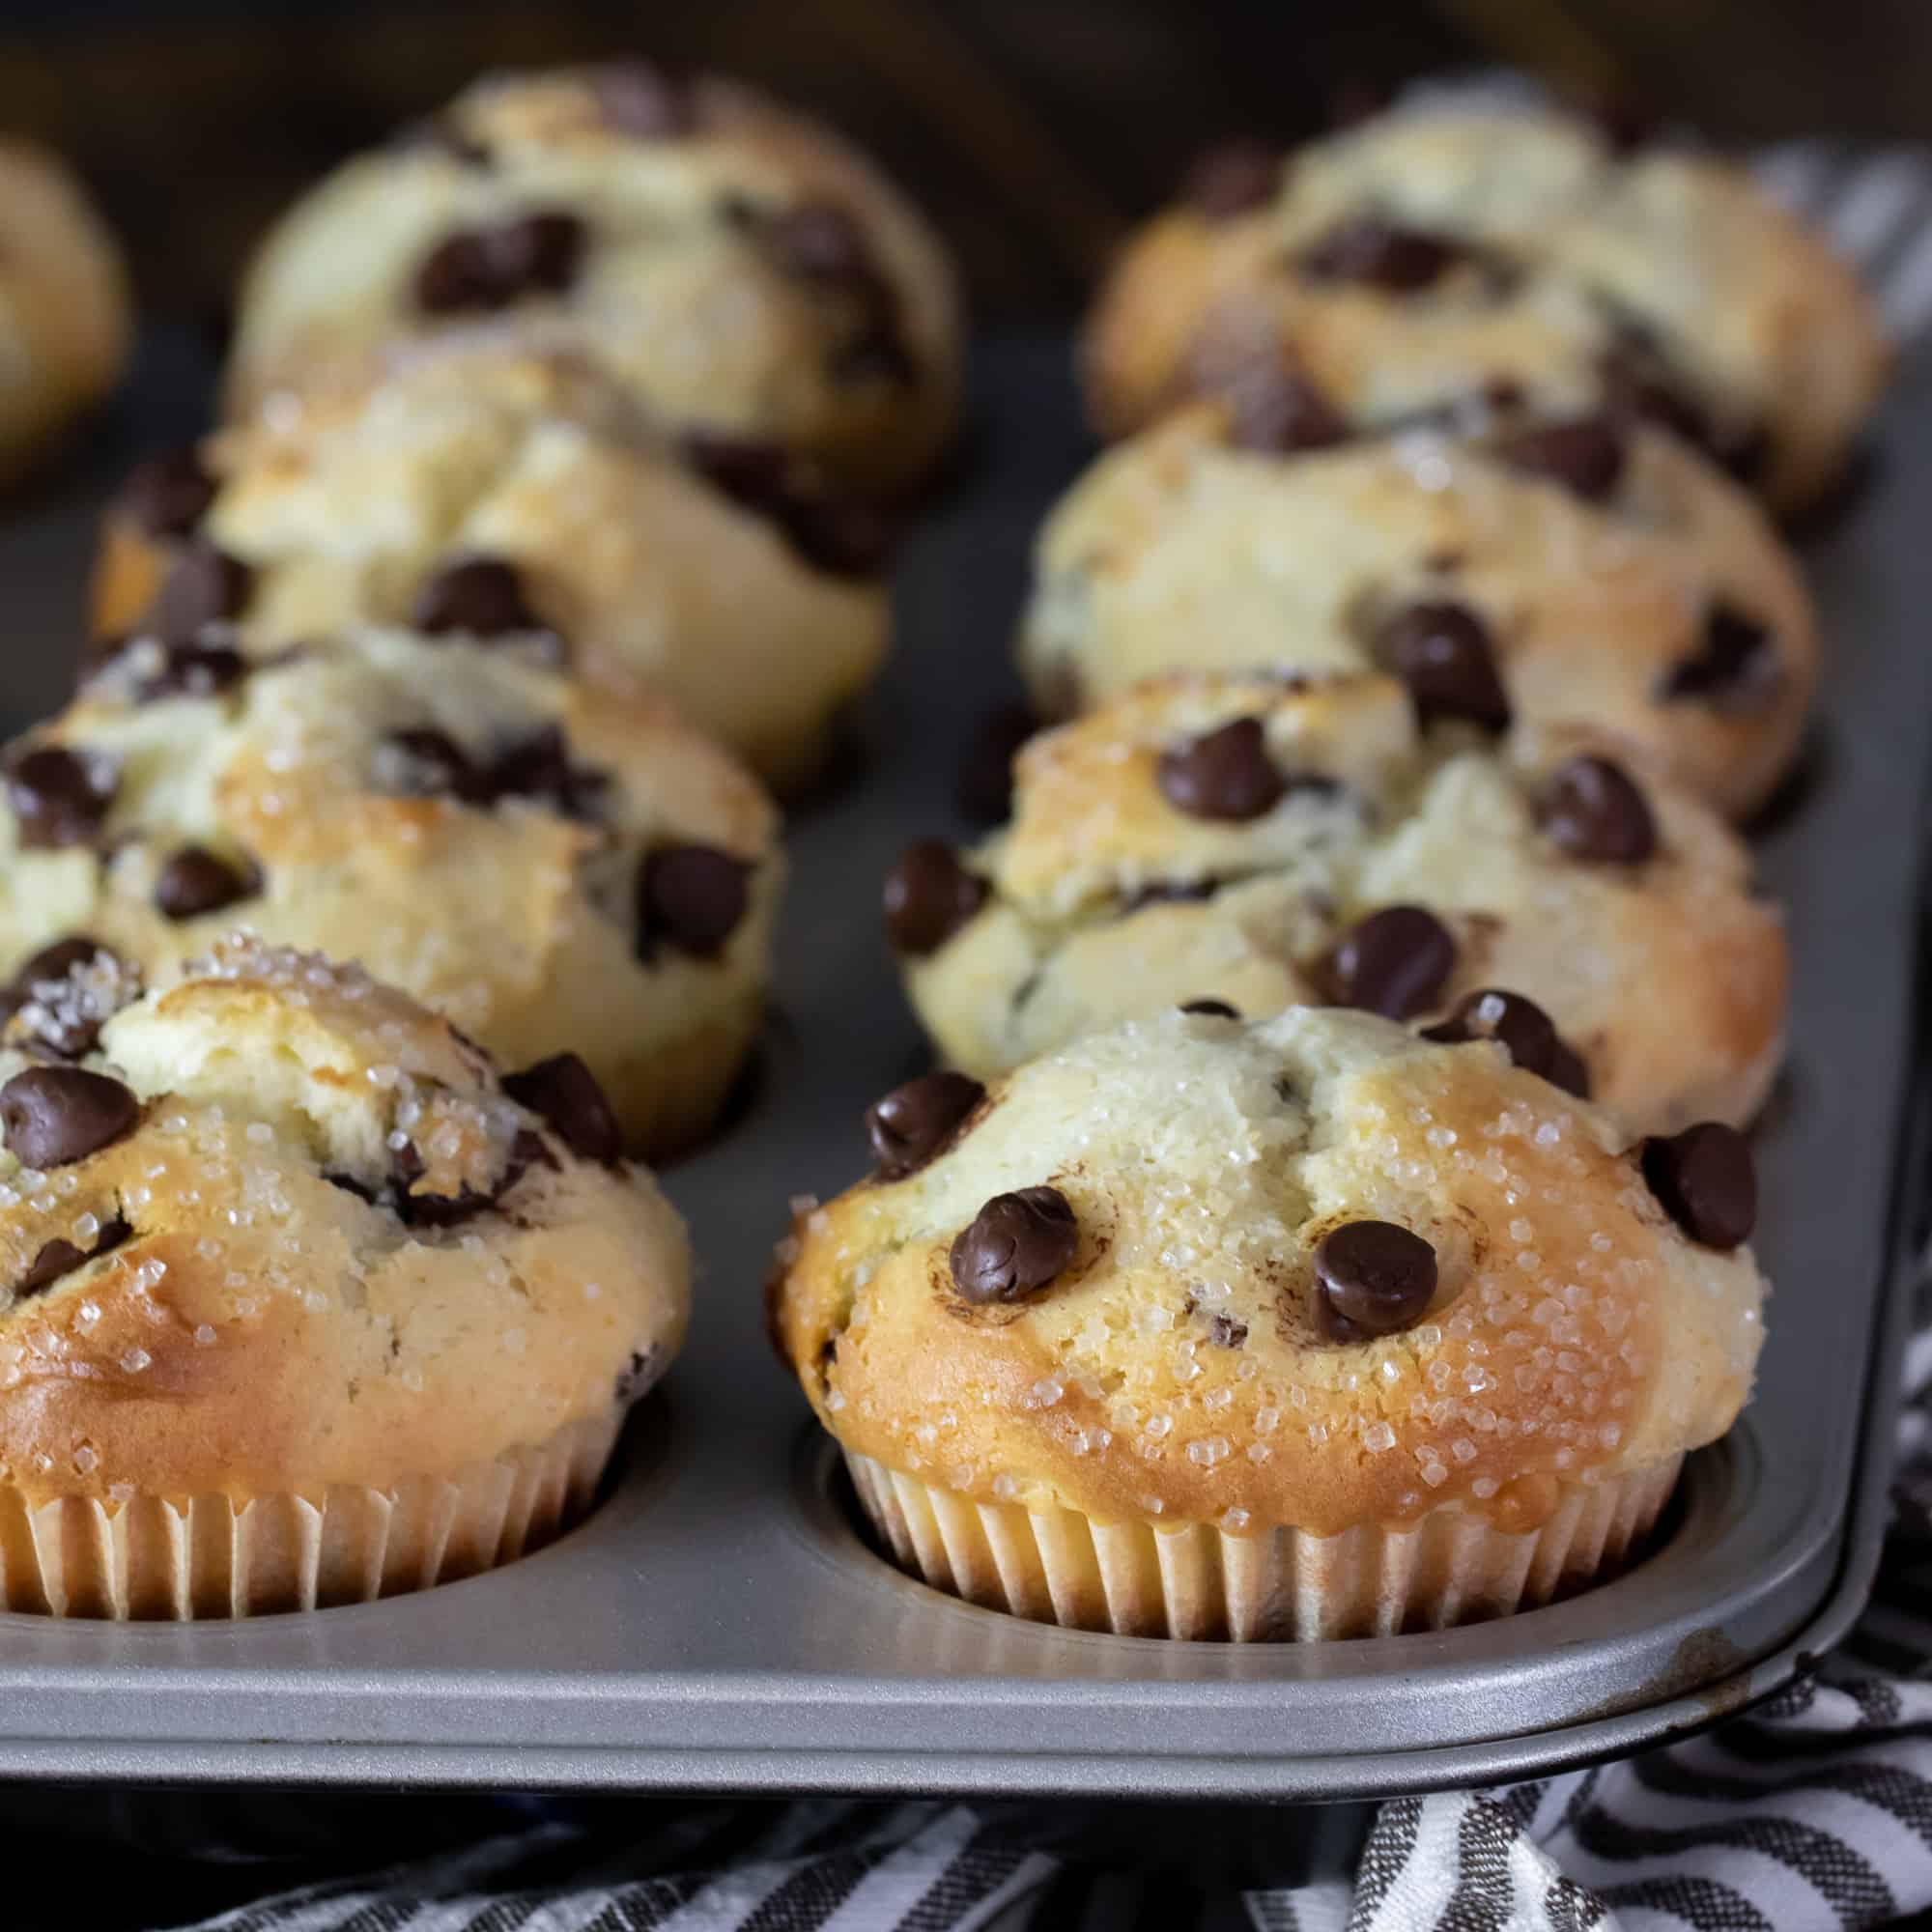 Fresh baked chocolate chip muffins in a tray.